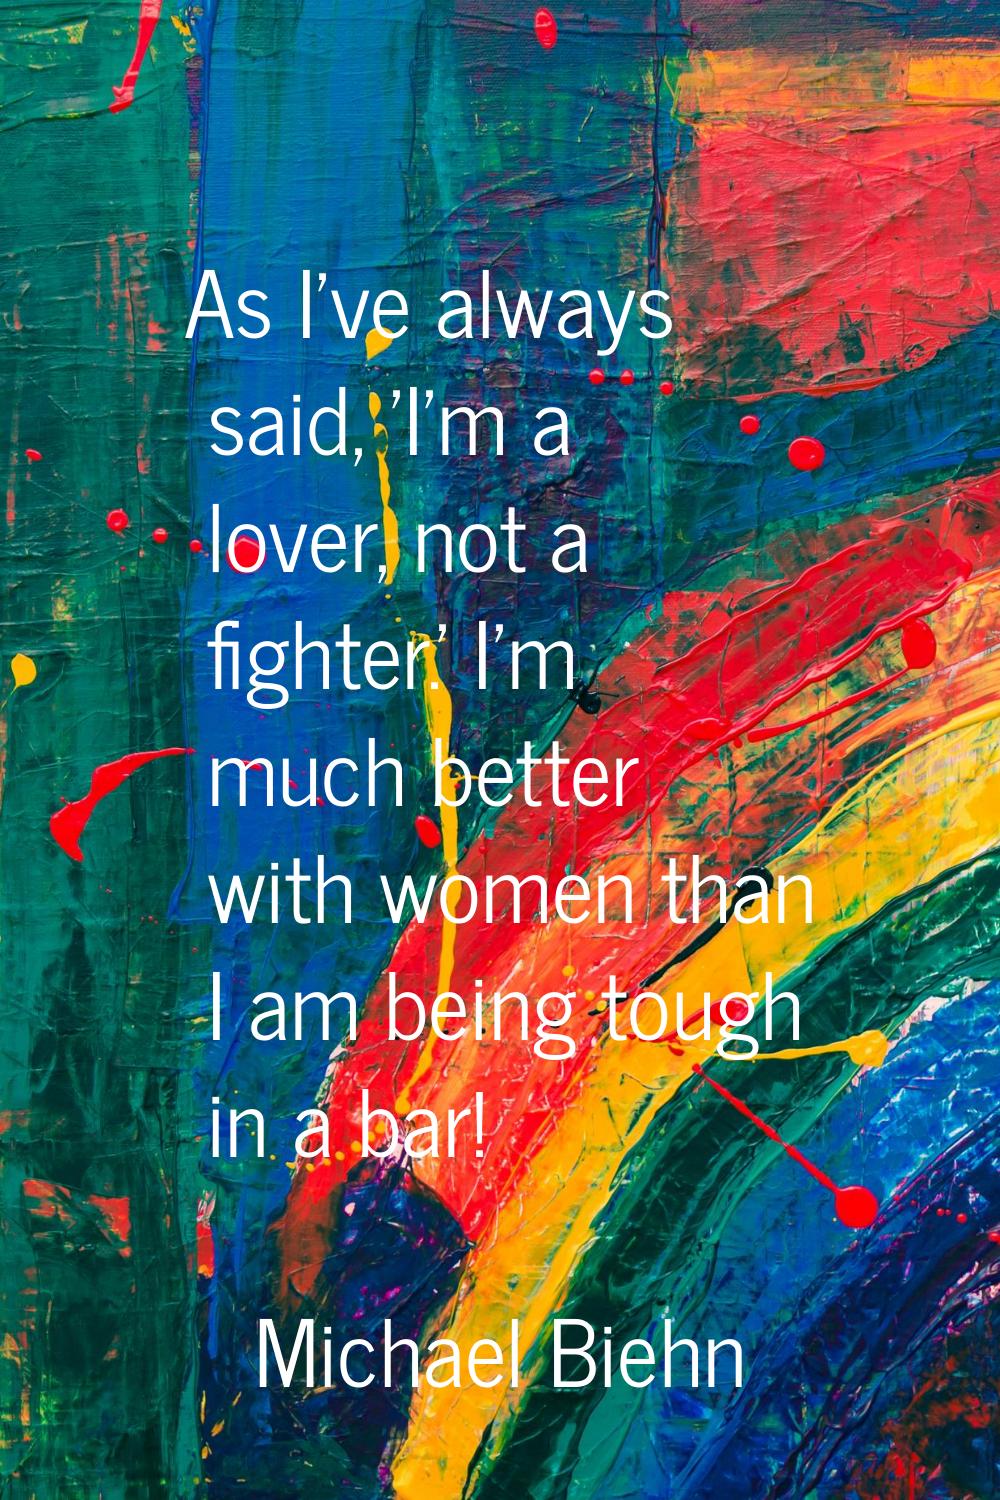 As I've always said, 'I'm a lover, not a fighter.' I'm much better with women than I am being tough